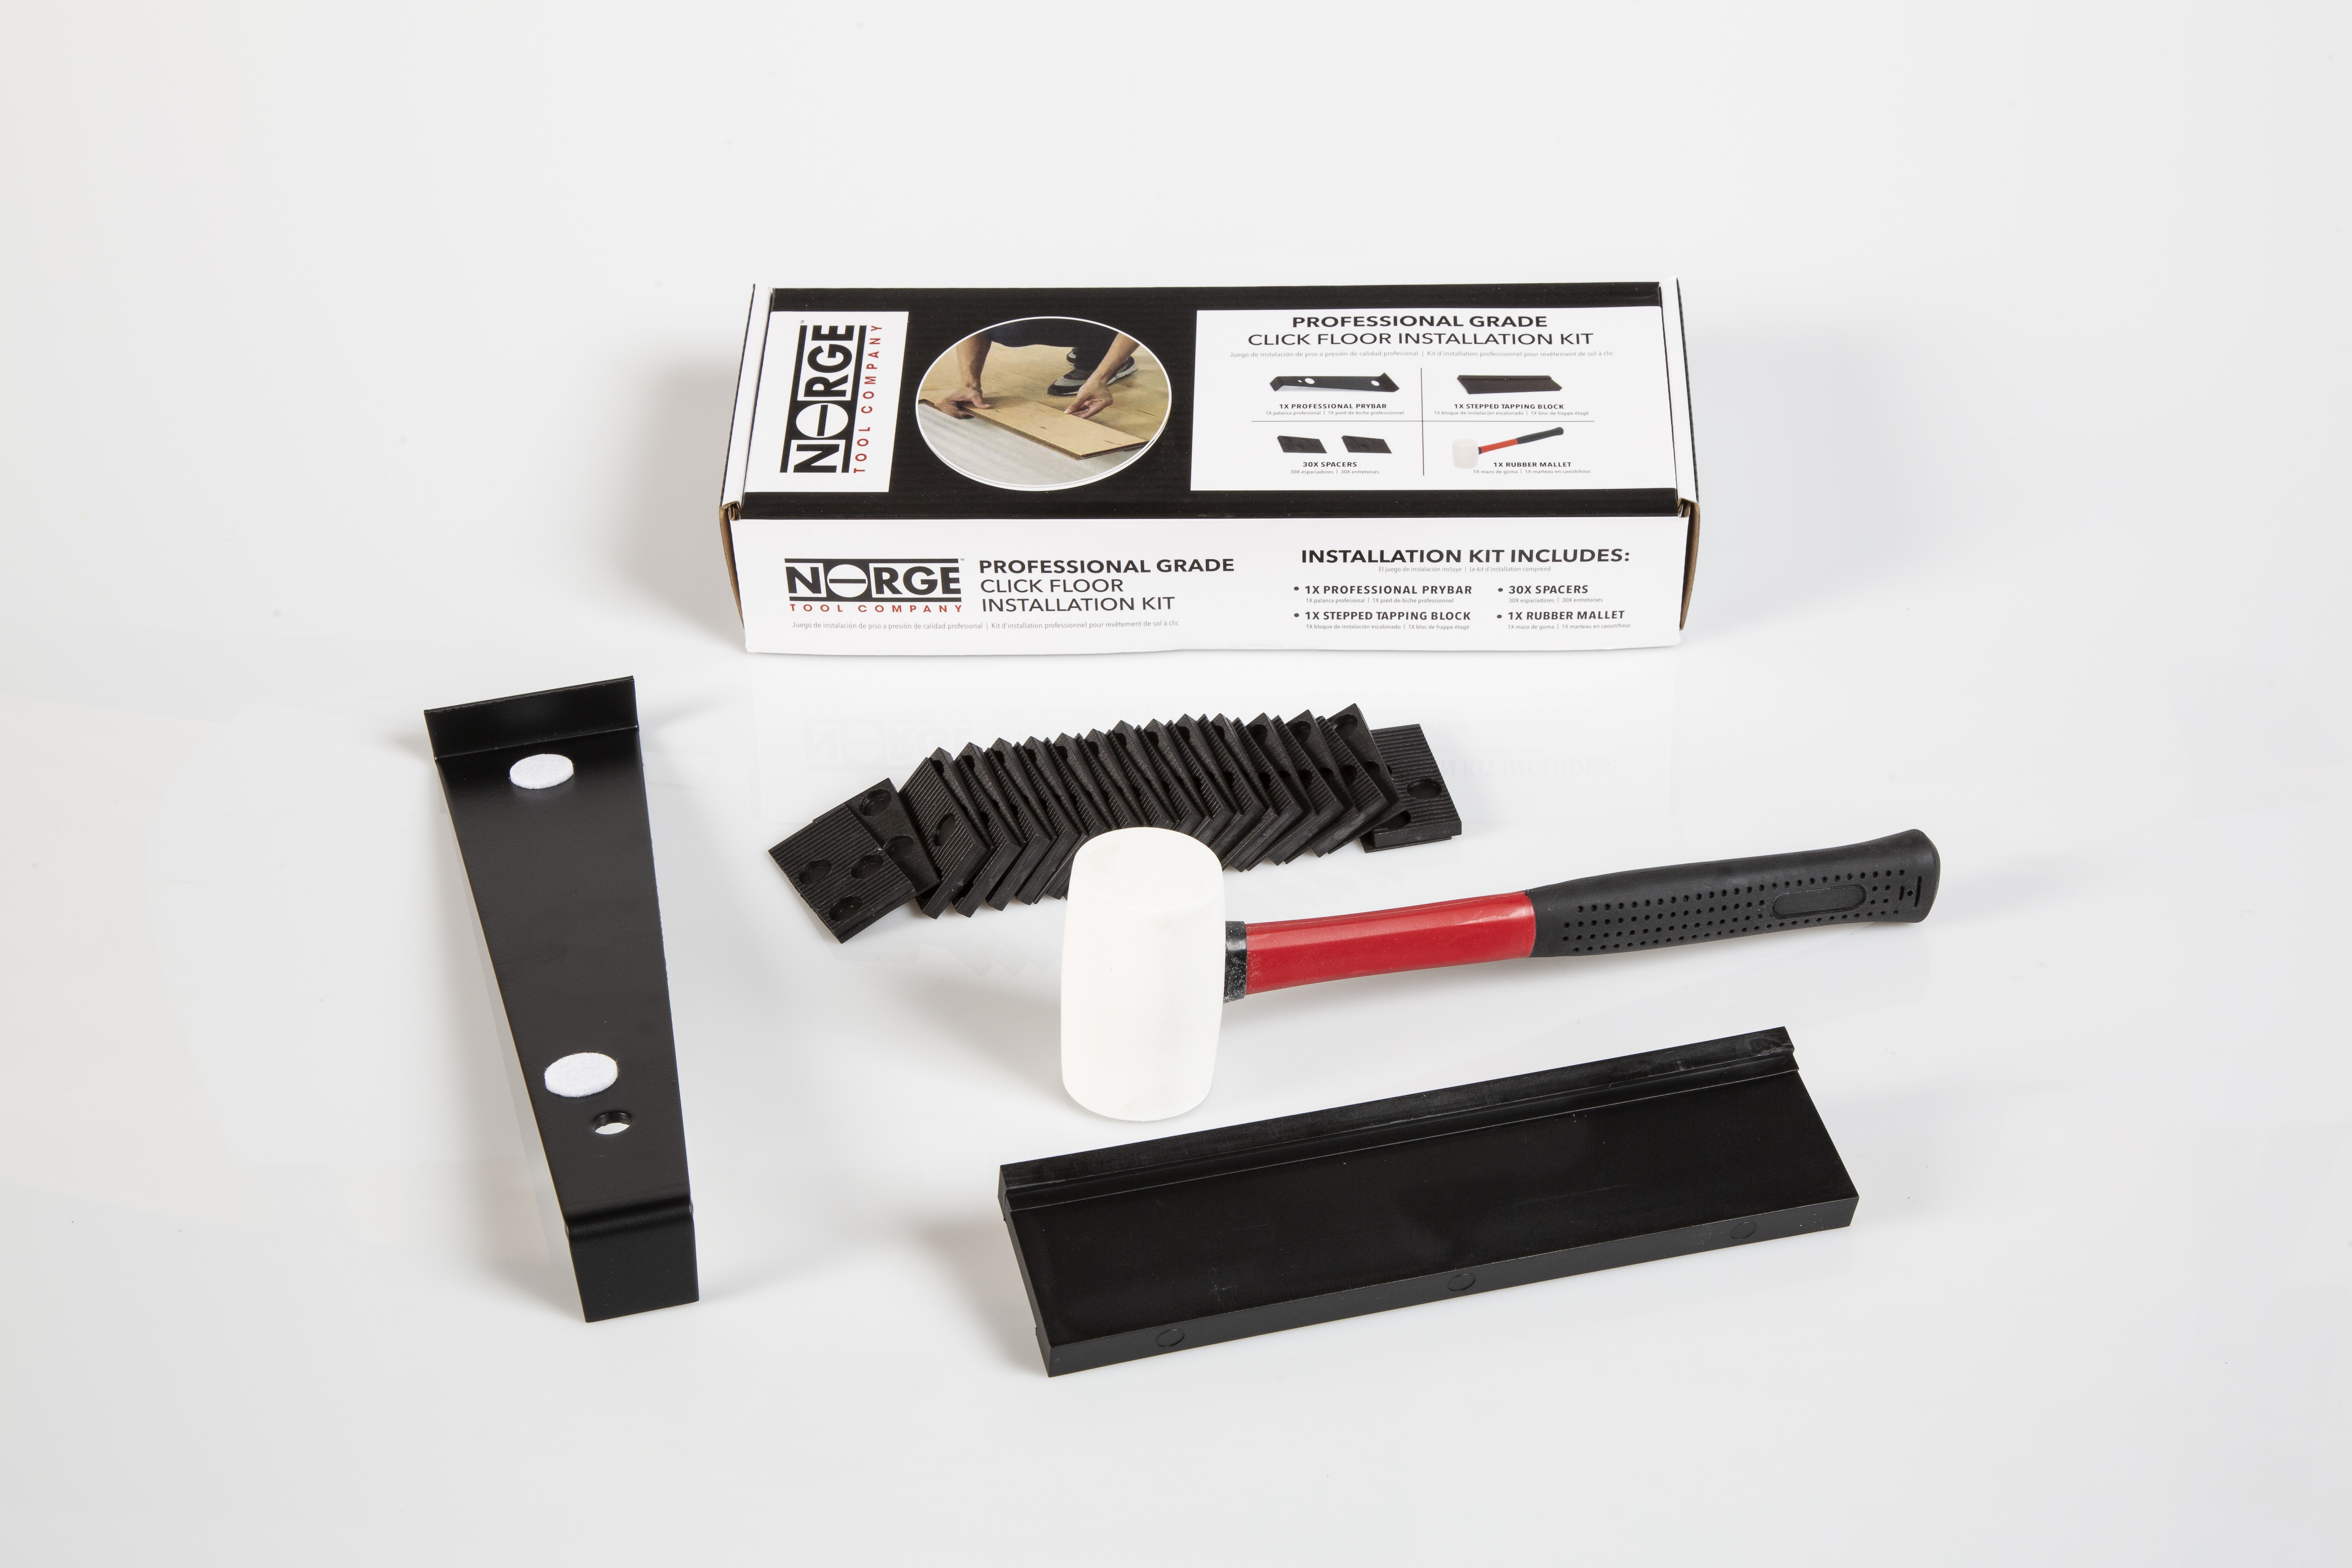 image shows item contained in norge click-flooring install kit: pull bar, mallet, spacers, tapping block